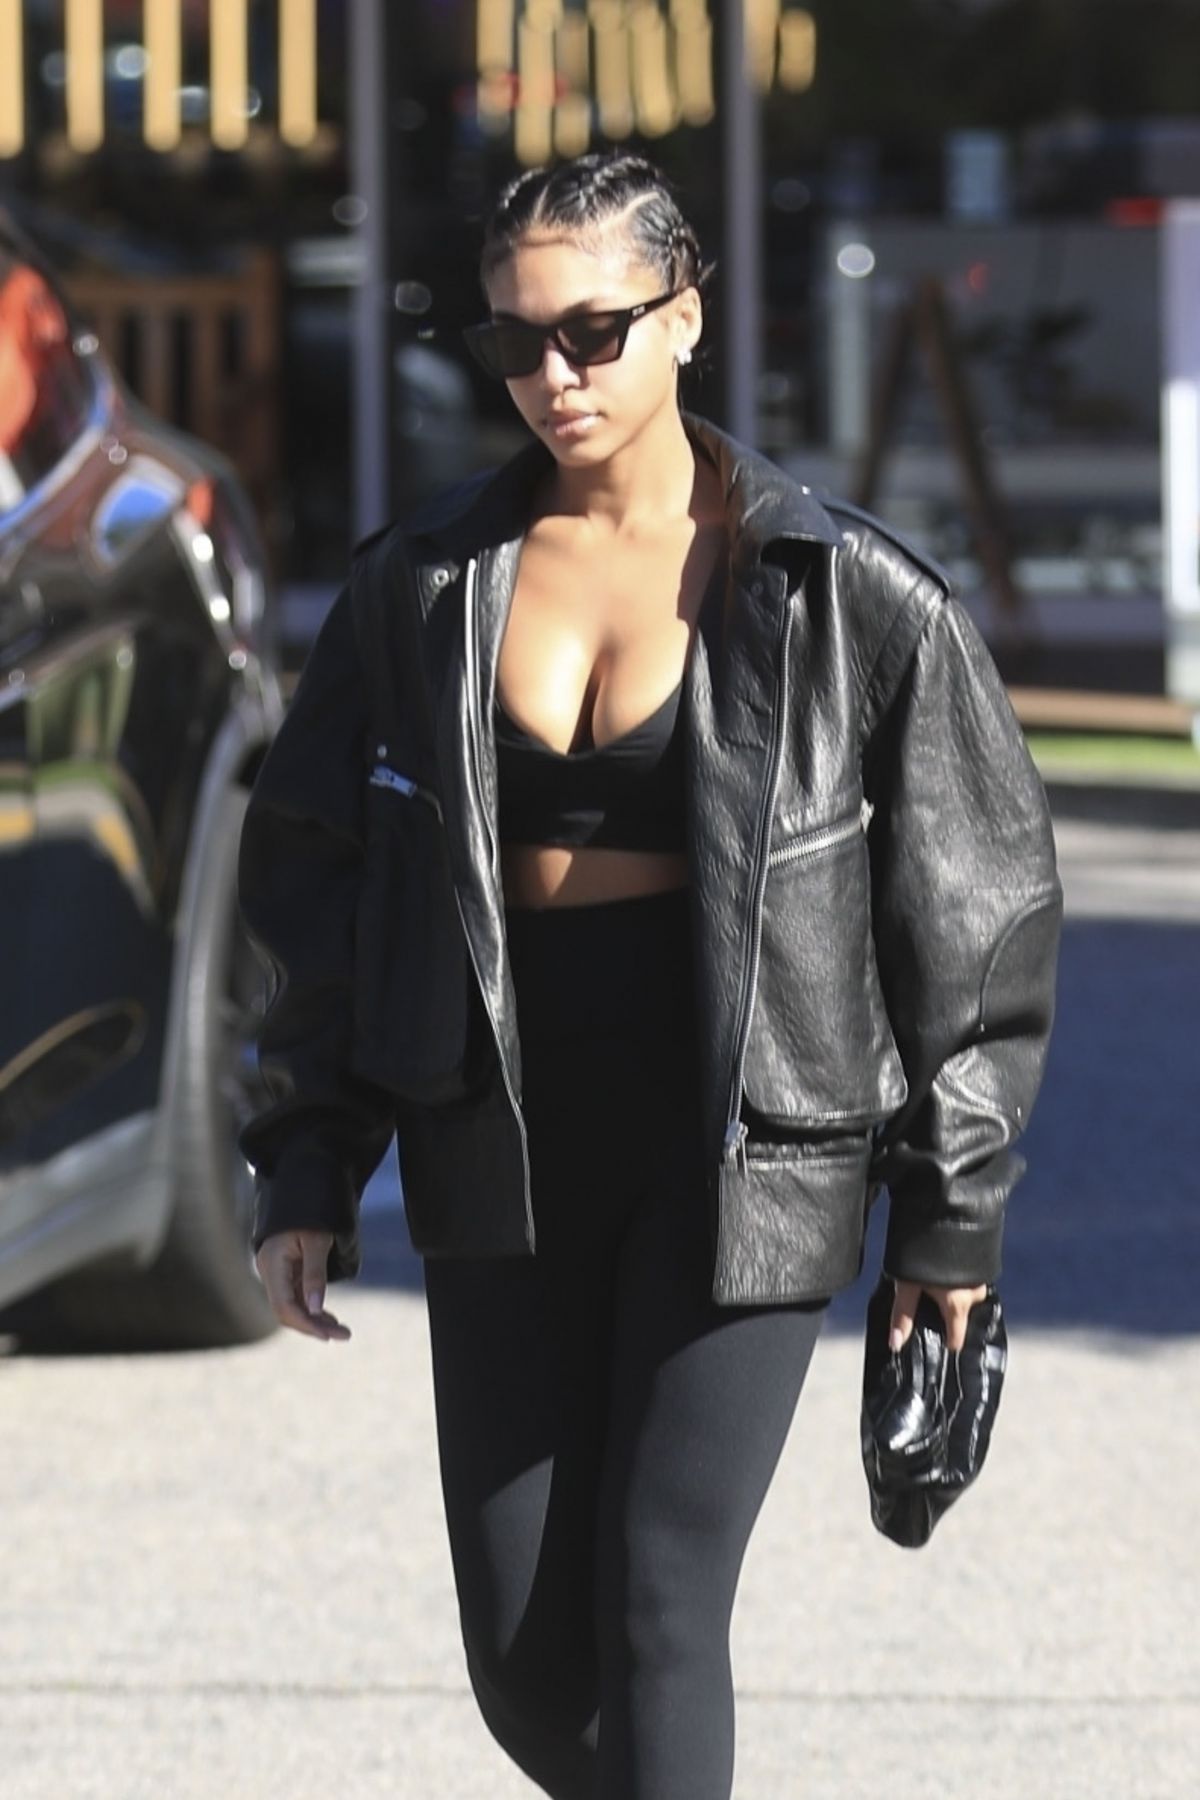 Lori Harvey sports black sports bra and leggings with a leather jacket  while stopping for a post-workout smoothie in Los Angeles